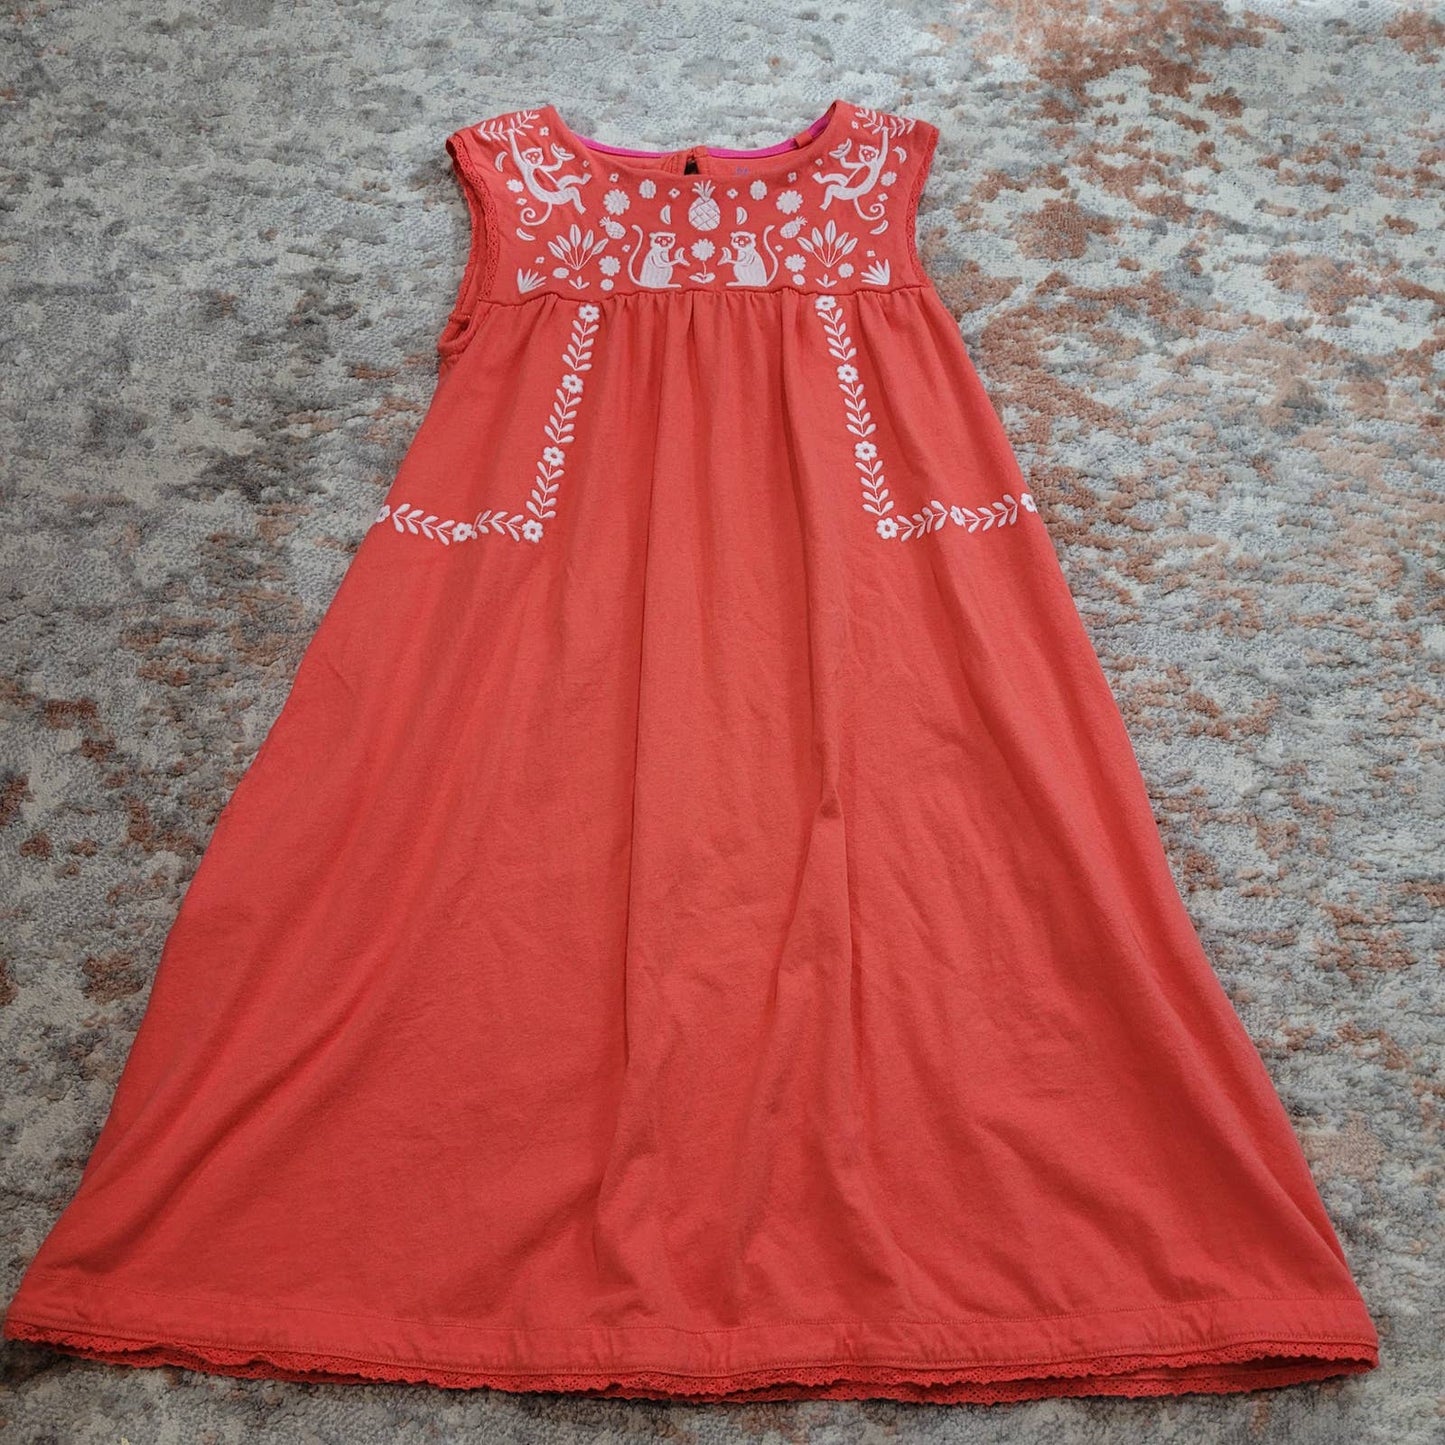 Mini Boden Coral Dress with Embroidered Monkey Pattern - Size 11-12